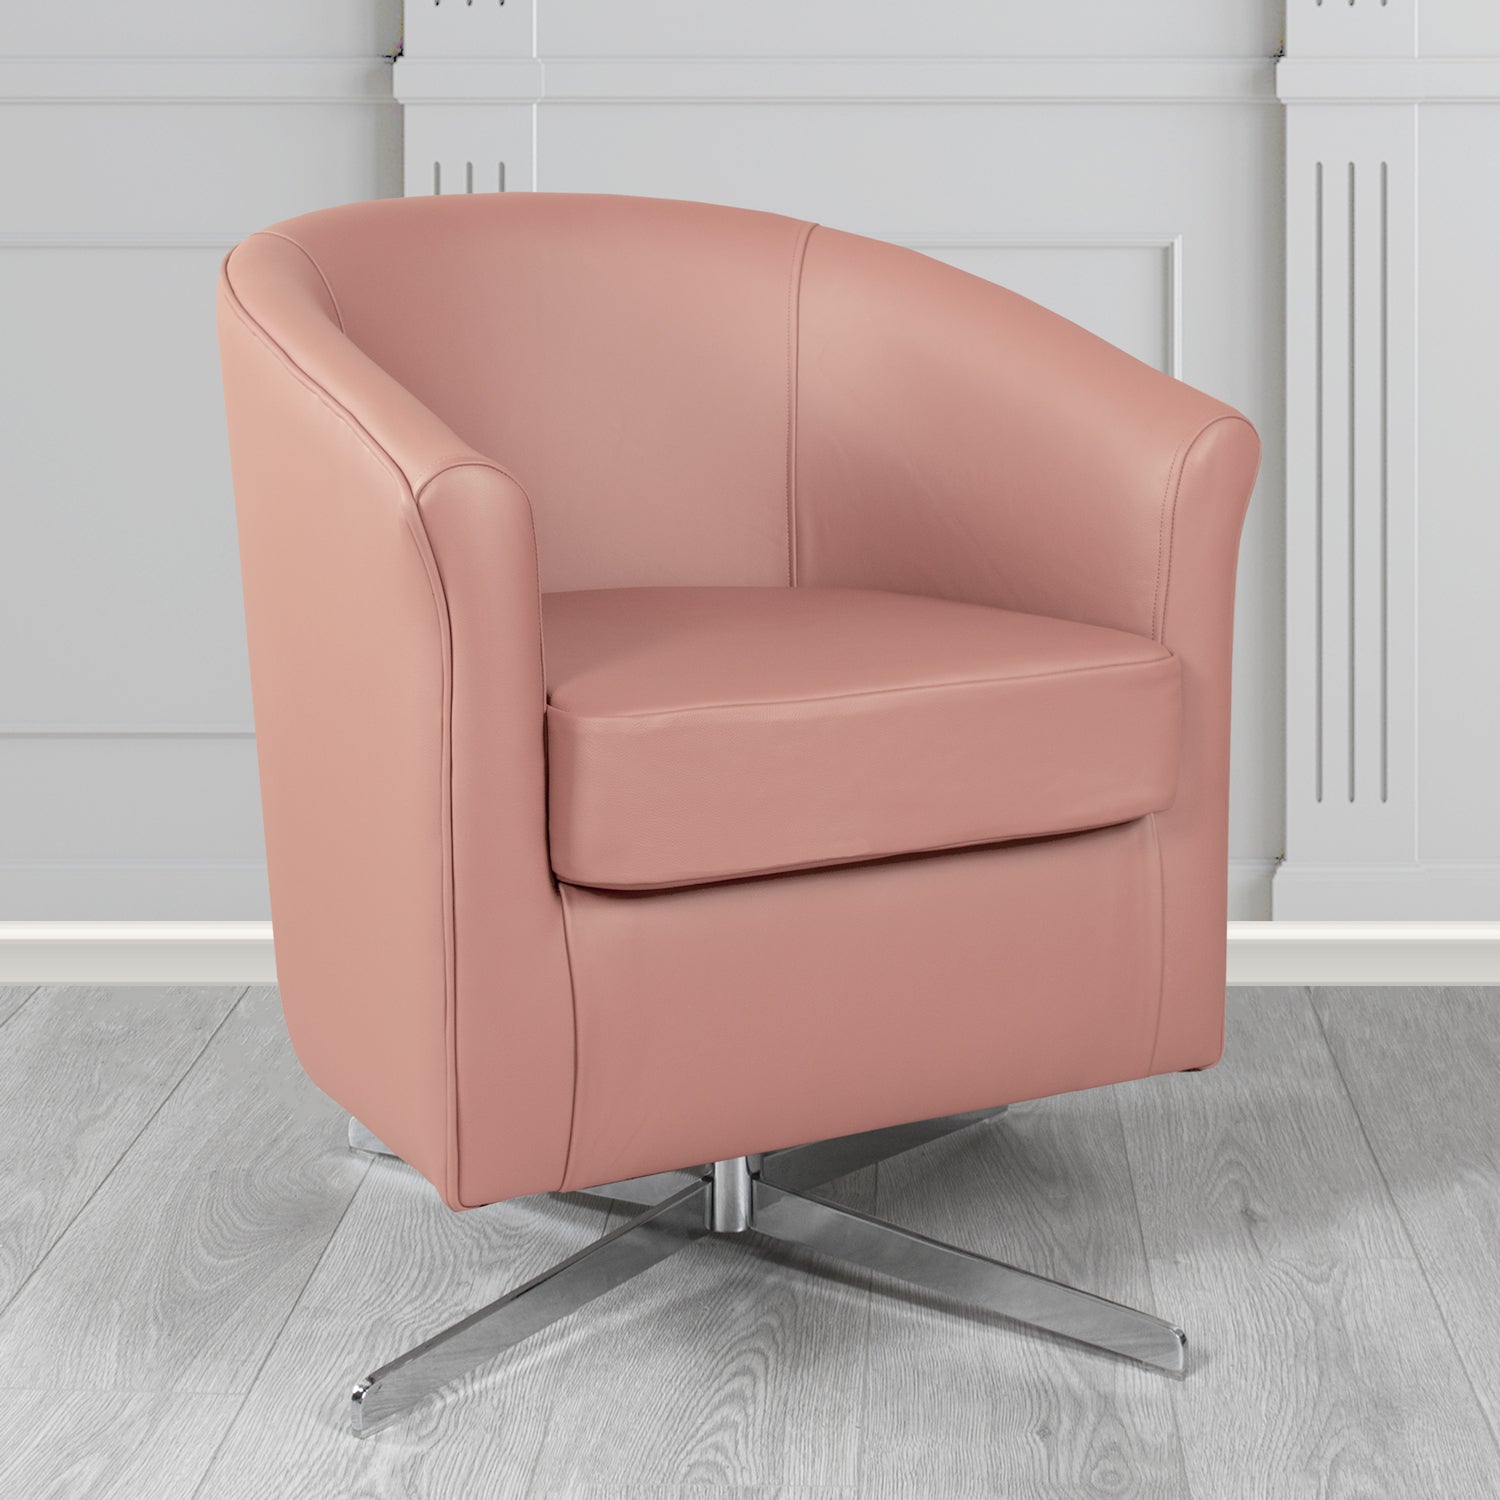 Cannes Swivel Tub Chair in Shelly Brick Red Crib 5 Genuine Leather - The Tub Chair Shop